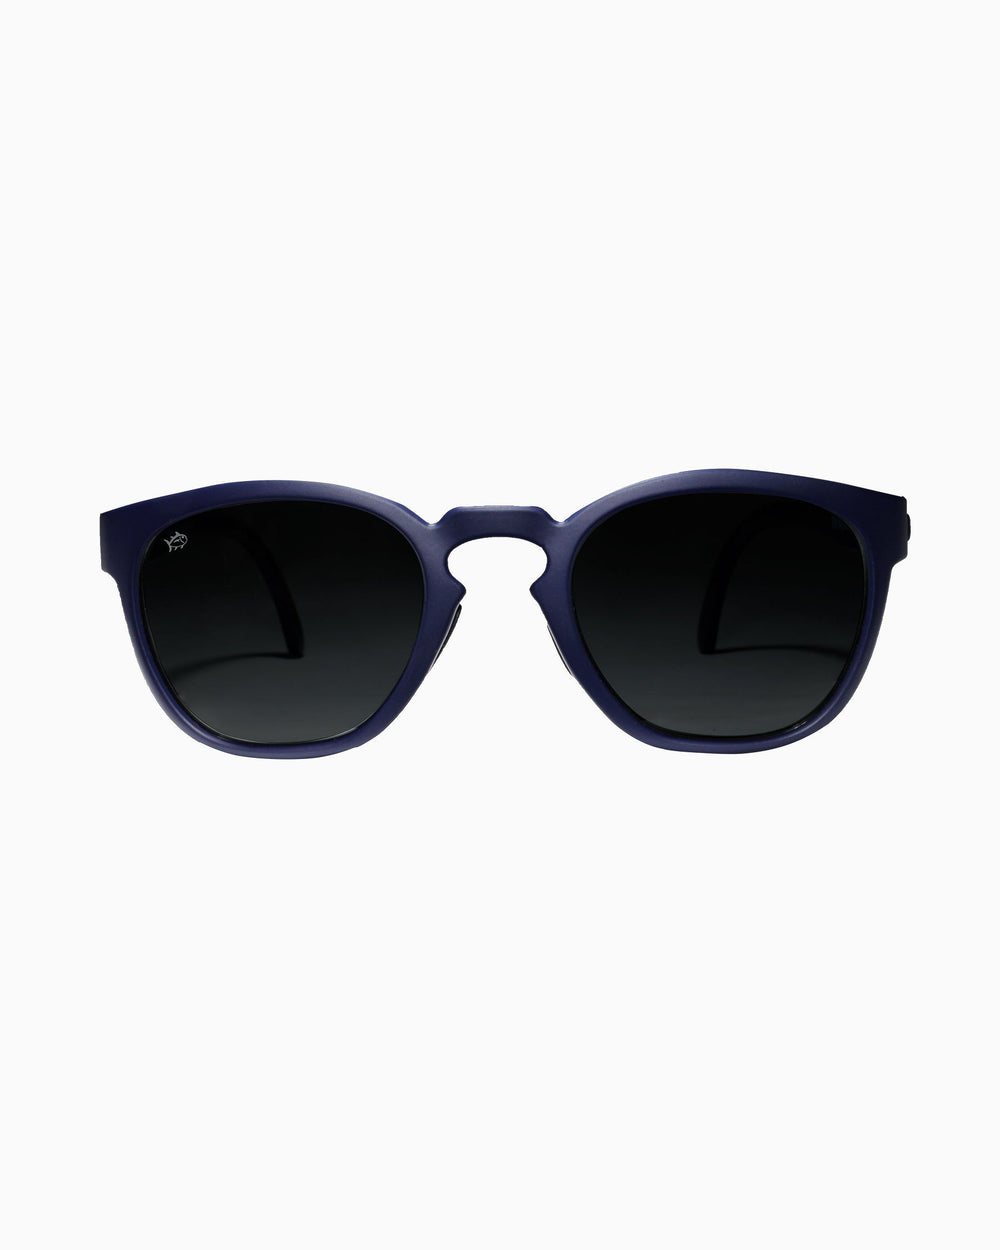 The front of the Rheos Seabrooks Sunglasses by Southern Tide - Boat Blue Gunmetal